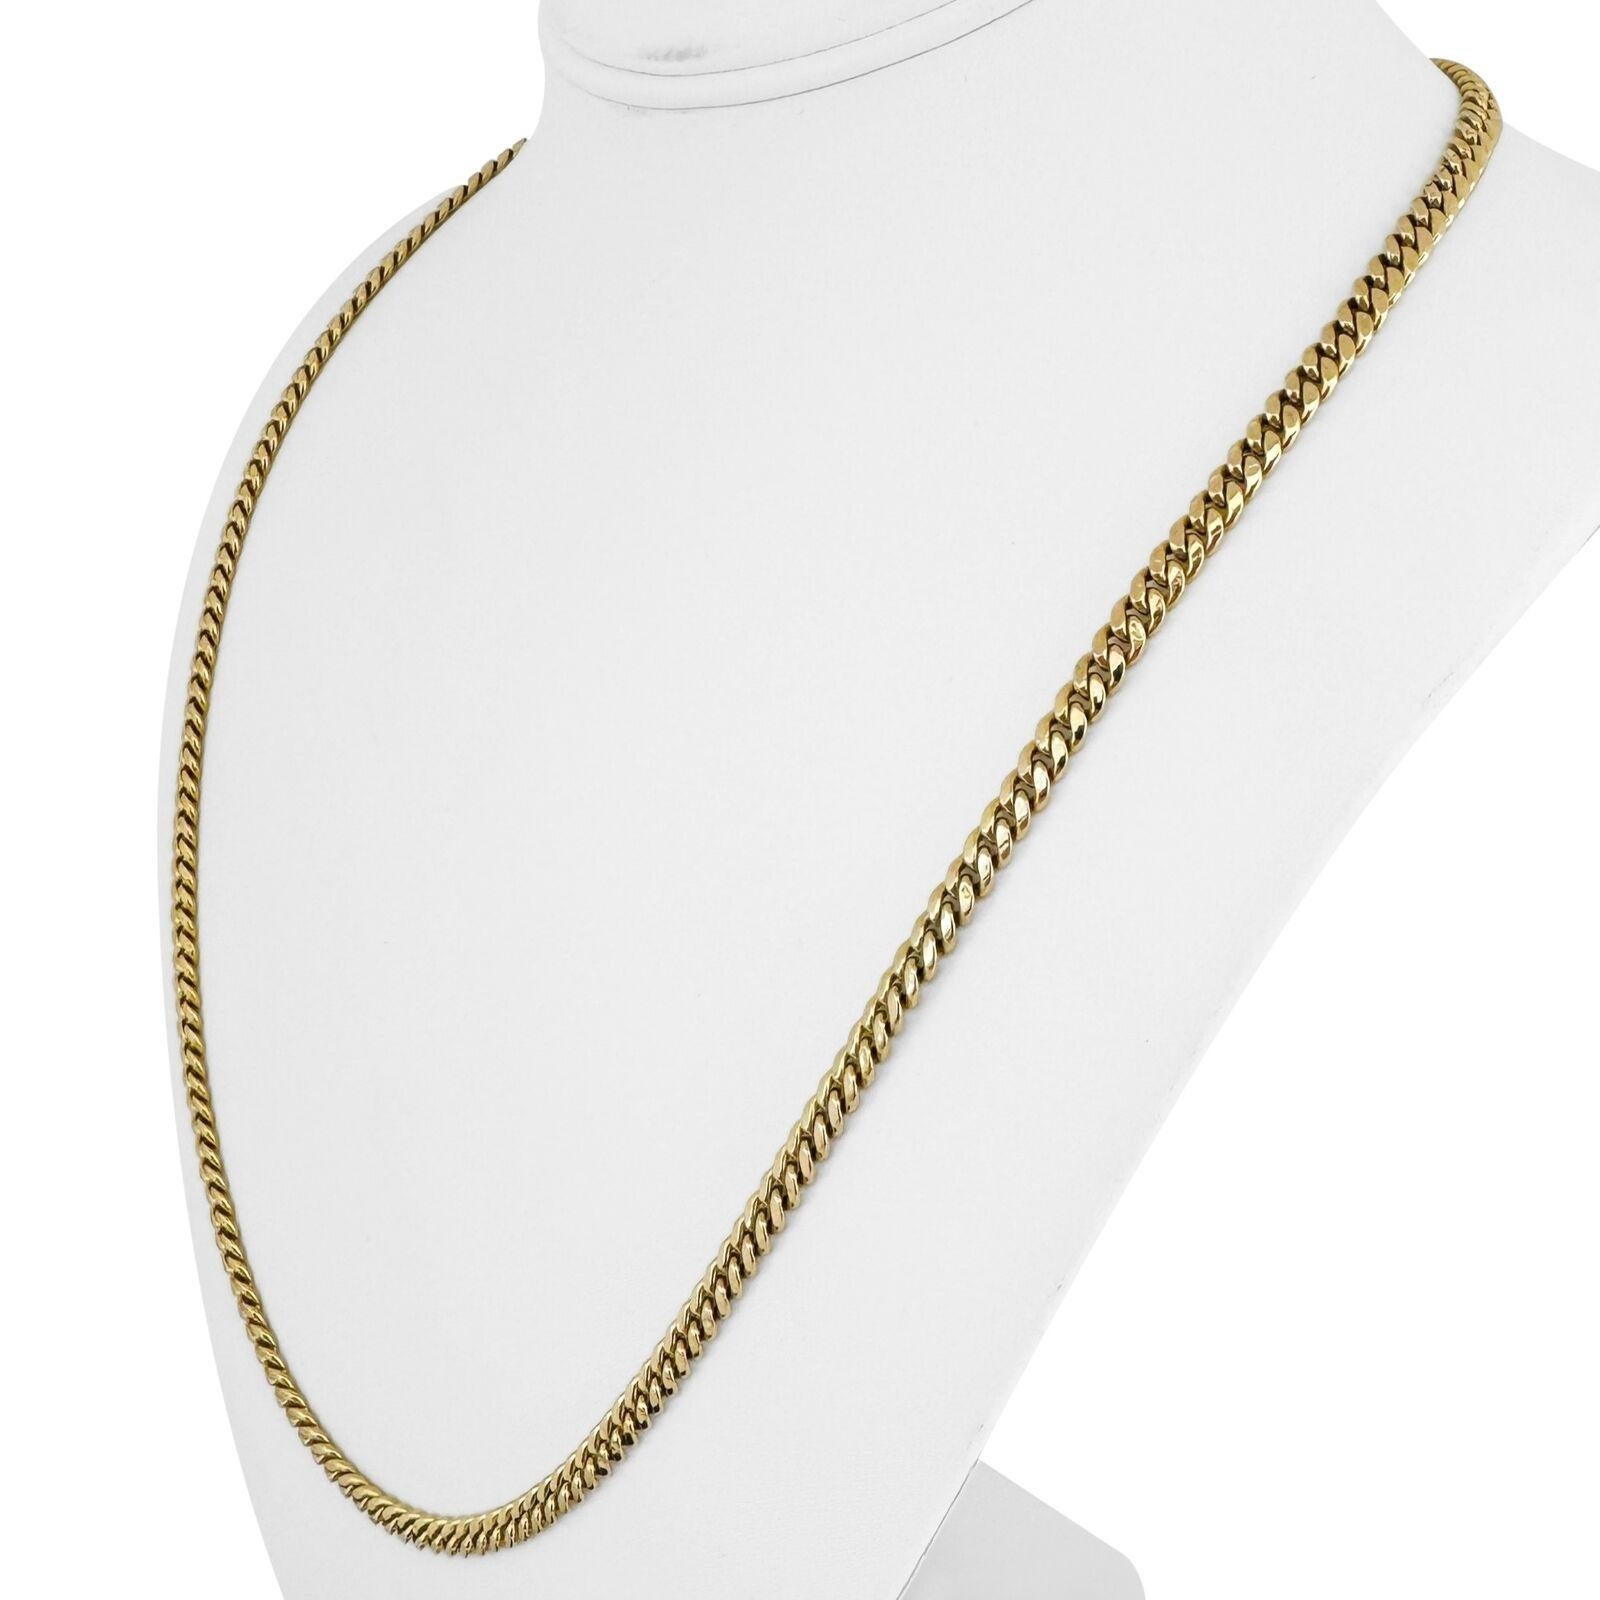 10k Yellow Gold 13.3g Hollow Polished 4mm Cuban Link Chain Necklace 24